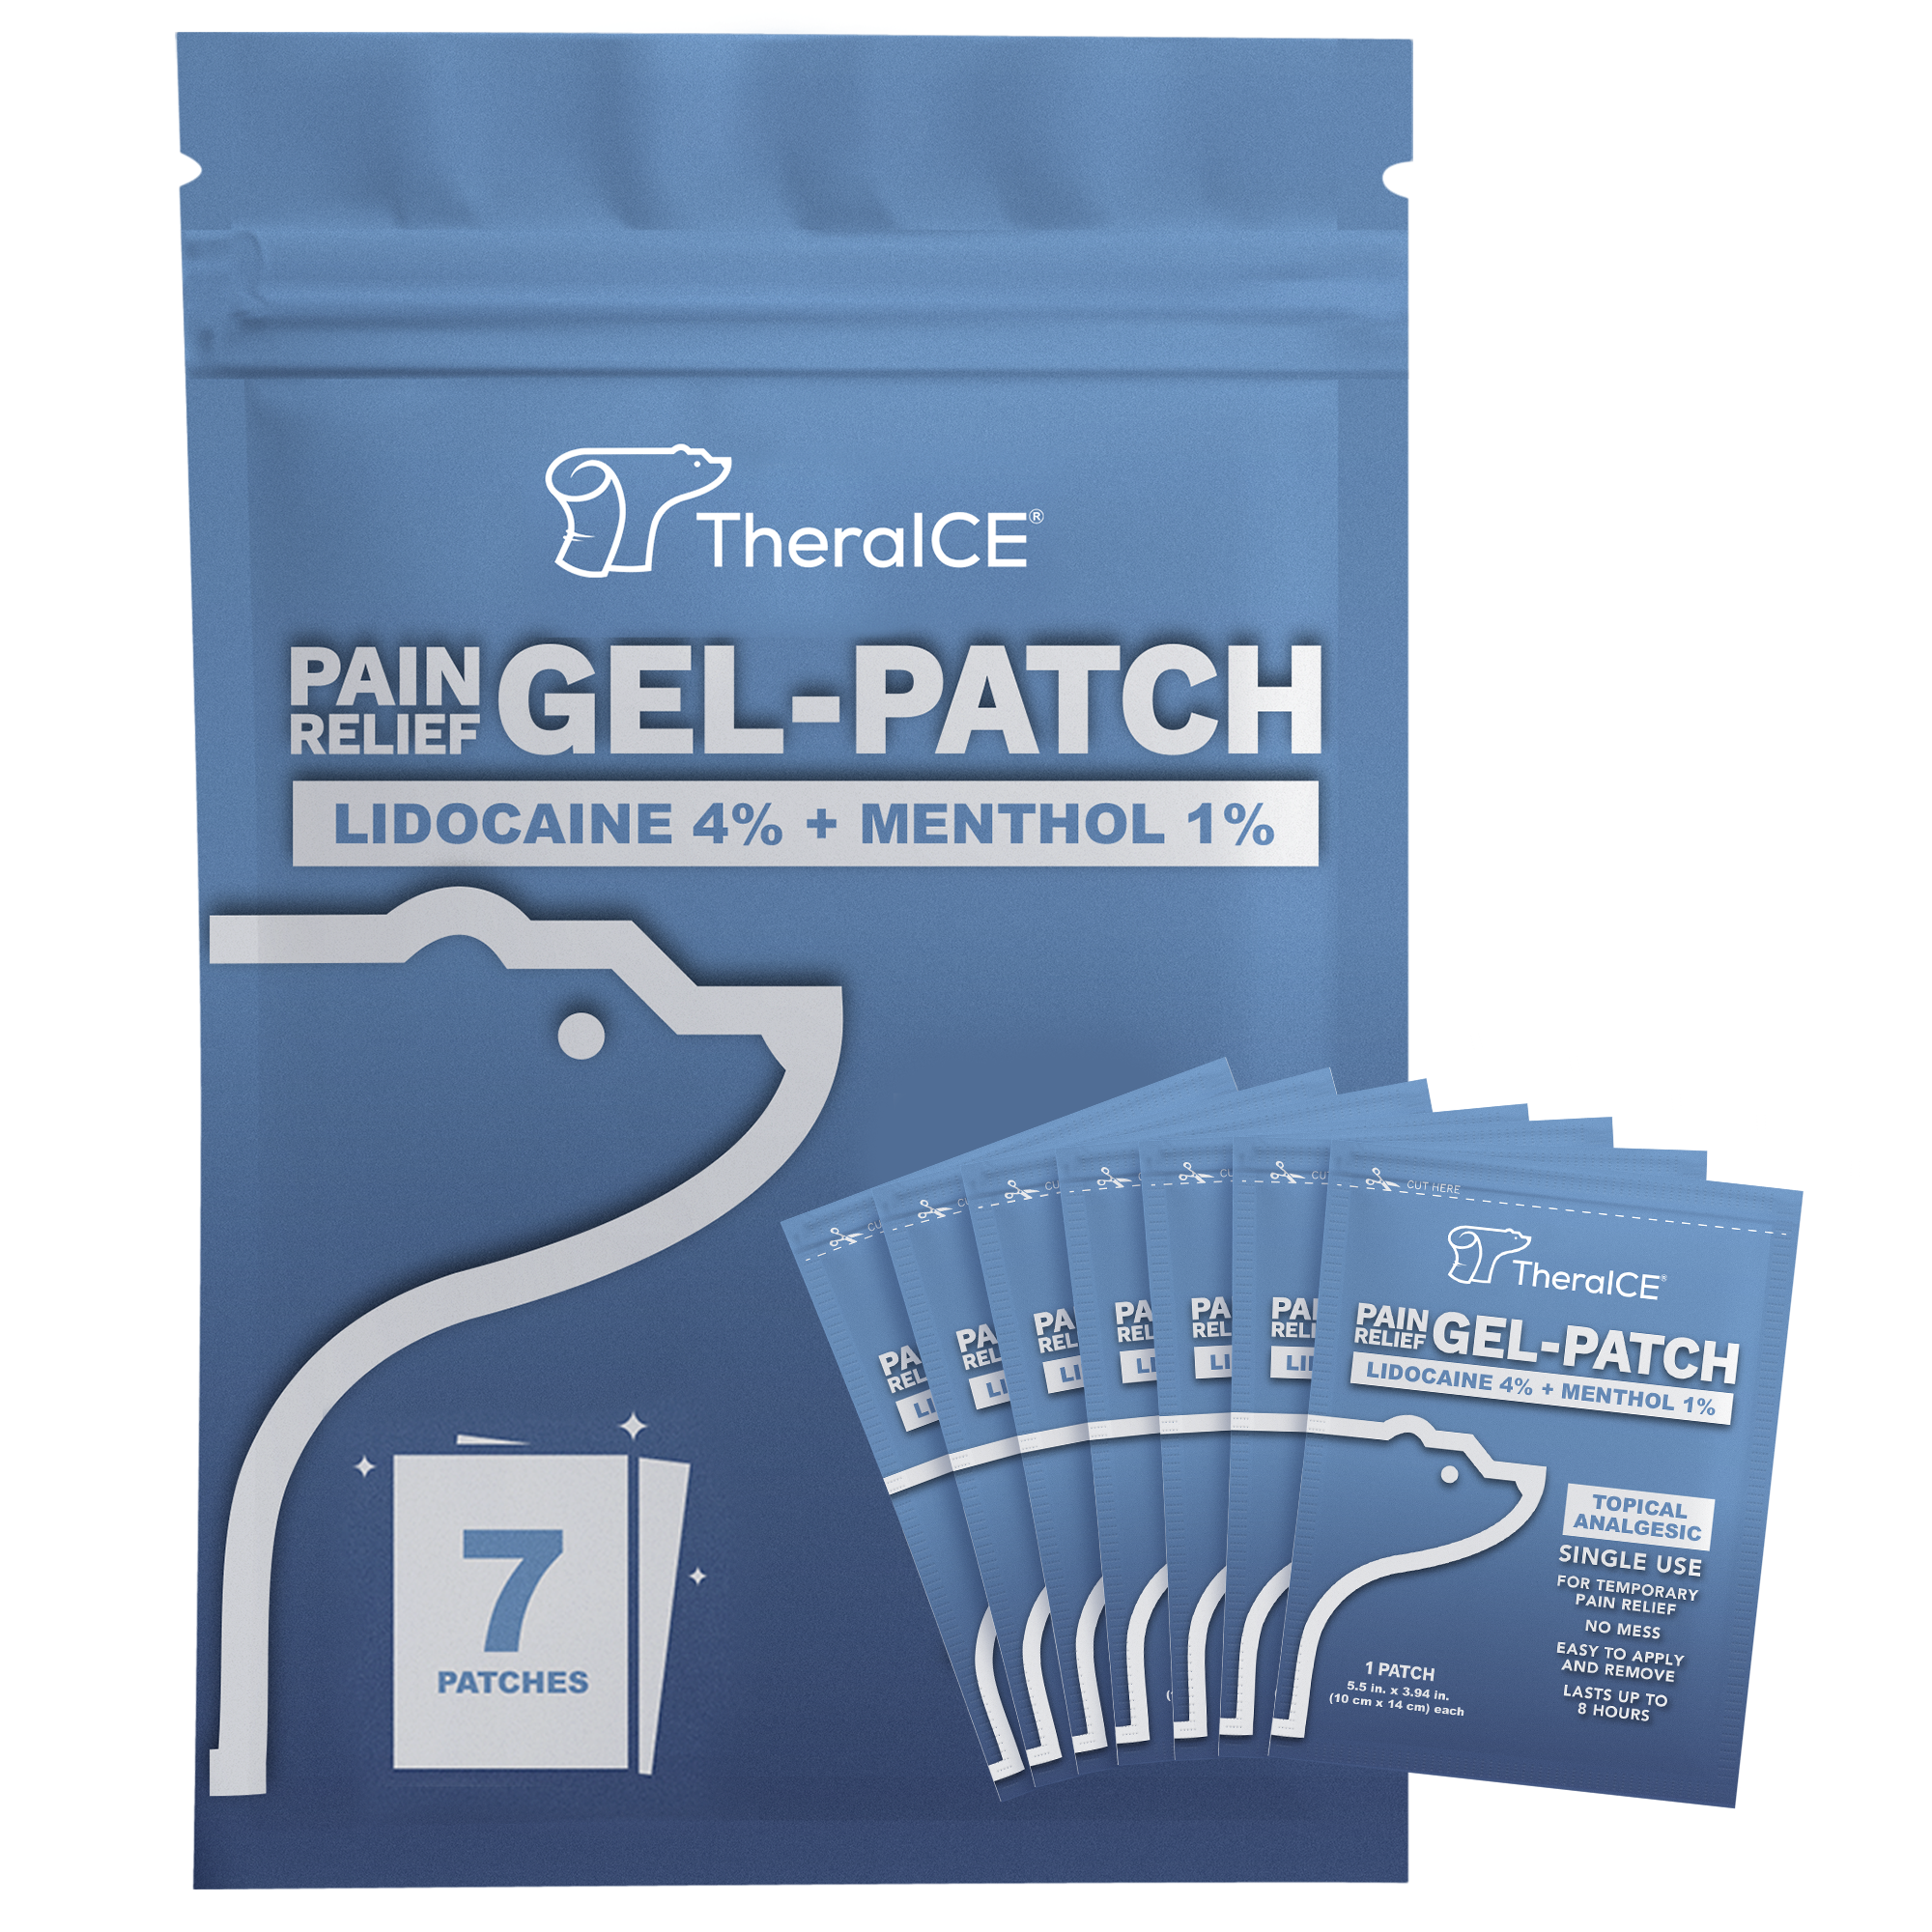 TheraICE Pain Relief Gel-Patch